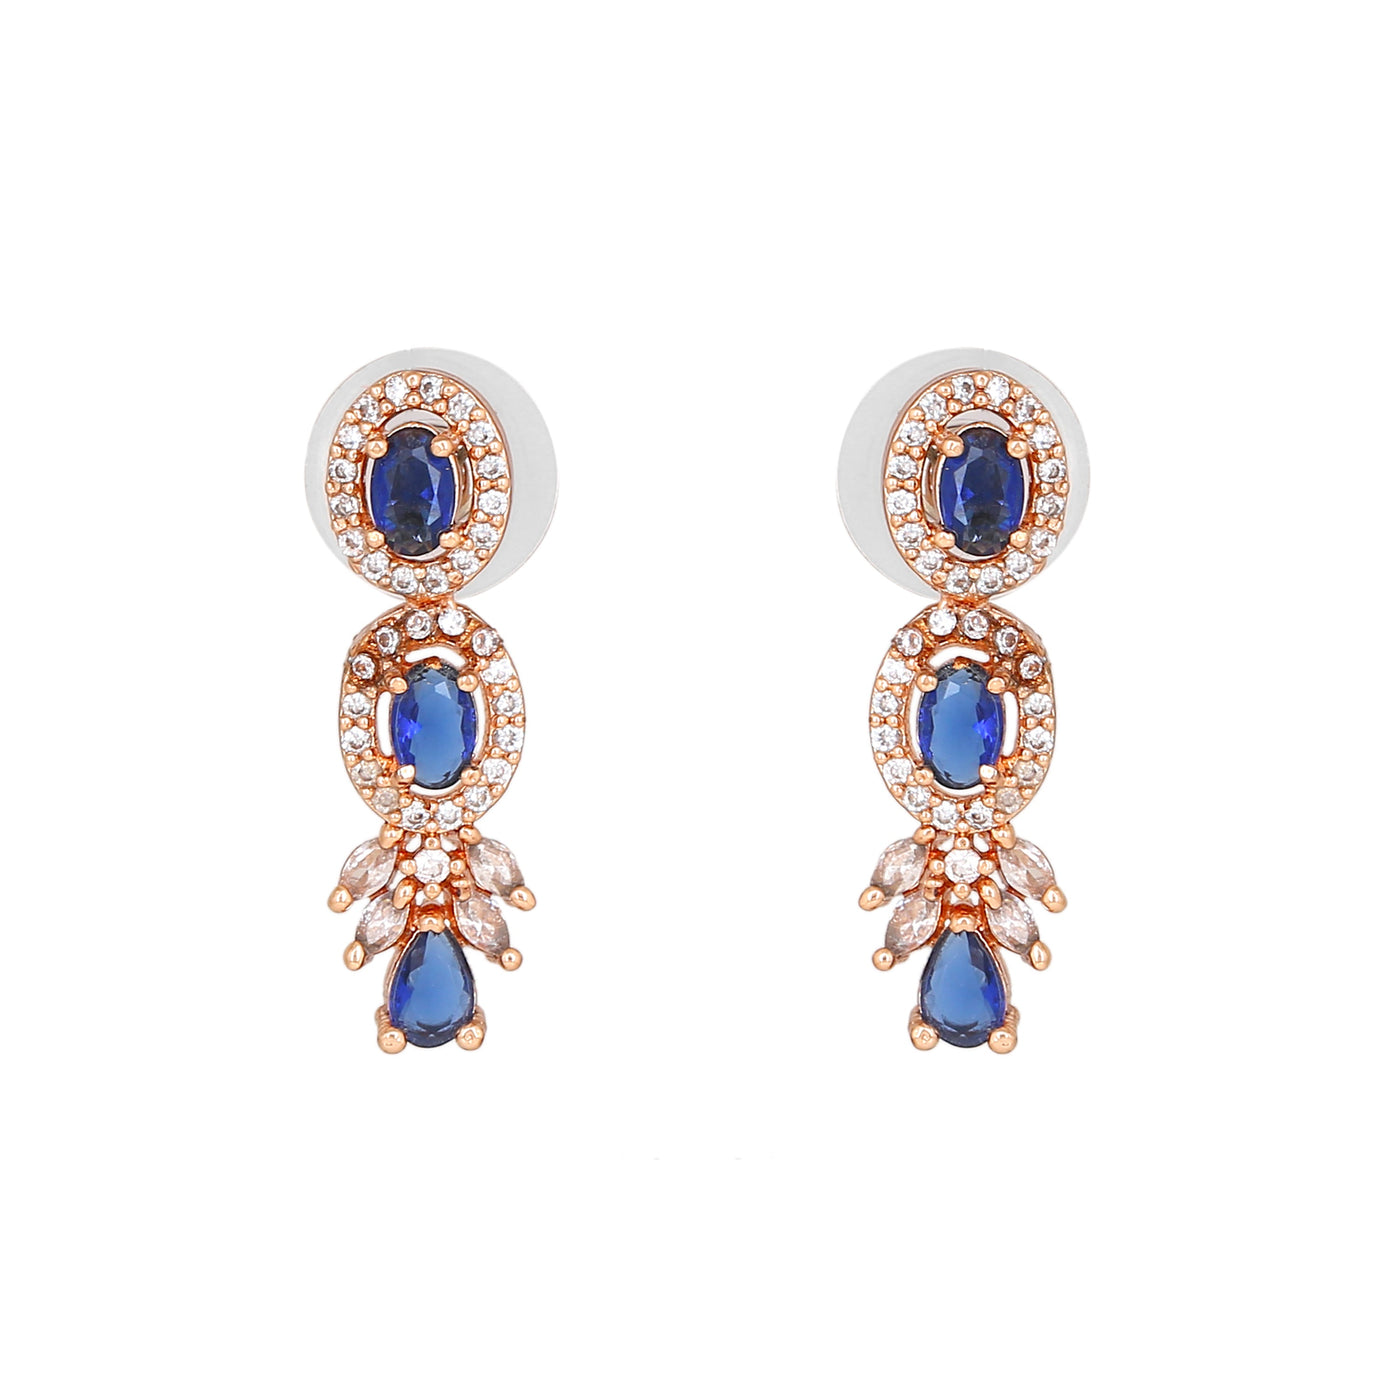 Estele Rose Gold Plated CZ Exquisite Necklace Set with Blue Crystals for Women